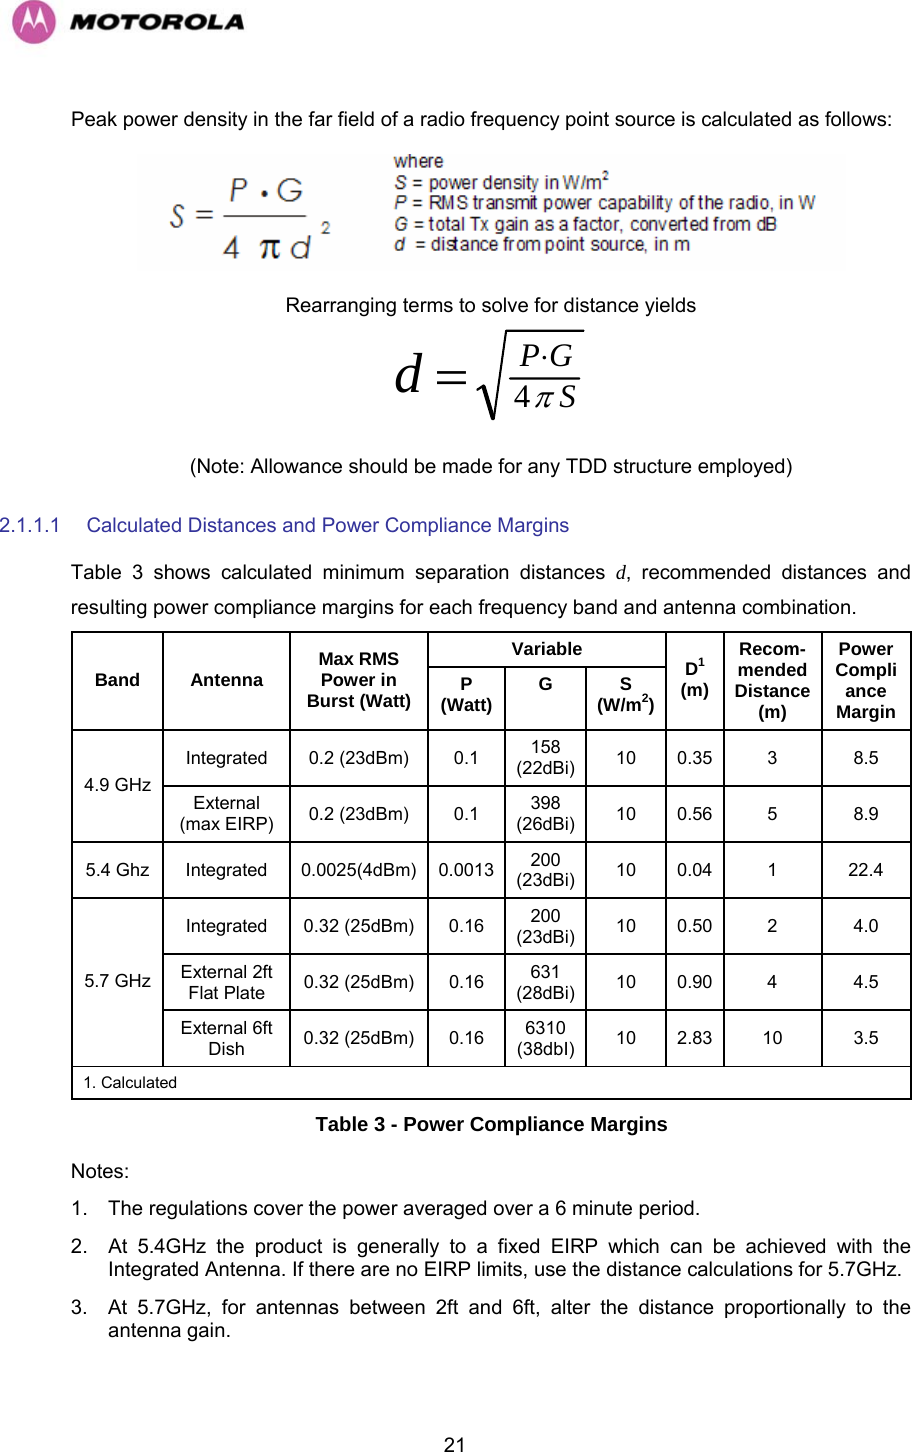   21Peak power density in the far field of a radio frequency point source is calculated as follows:  Rearranging terms to solve for distance yields SGPdπ4⋅= (Note: Allowance should be made for any TDD structure employed) 2.1.1.1  Calculated Distances and Power Compliance Margins Table 3 shows calculated minimum separation distances d, recommended distances and resulting power compliance margins for each frequency band and antenna combination. Variable Band Antenna  Max RMS Power in Burst (Watt)  P (Watt)  G S (W/m2) D1 (m) Recom- mended Distance (m) PowerCompliance Margin Integrated 0.2 (23dBm)  0.1  158 (22dBi) 10 0.35  3  8.5 4.9 GHz External (max EIRP)  0.2 (23dBm)  0.1  398 (26dBi) 10 0.56  5  8.9 5.4 Ghz  Integrated  0.0025(4dBm)  0.0013 200 (23dBi) 10 0.04  1  22.4 Integrated 0.32 (25dBm) 0.16  200 (23dBi) 10 0.50  2  4.0 External 2ft Flat Plate  0.32 (25dBm)  0.16  631 (28dBi) 10 0.90  4  4.5 5.7 GHz External 6ft Dish  0.32 (25dBm)  0.16  6310 (38dbI)  10 2.83  10  3.5 1. Calculated Table 3 - Power Compliance Margins Notes: 1.  The regulations cover the power averaged over a 6 minute period. 2.  At 5.4GHz the product is generally to a fixed EIRP which can be achieved with the Integrated Antenna. If there are no EIRP limits, use the distance calculations for 5.7GHz. 3.  At 5.7GHz, for antennas between 2ft and 6ft, alter the distance proportionally to the antenna gain. 